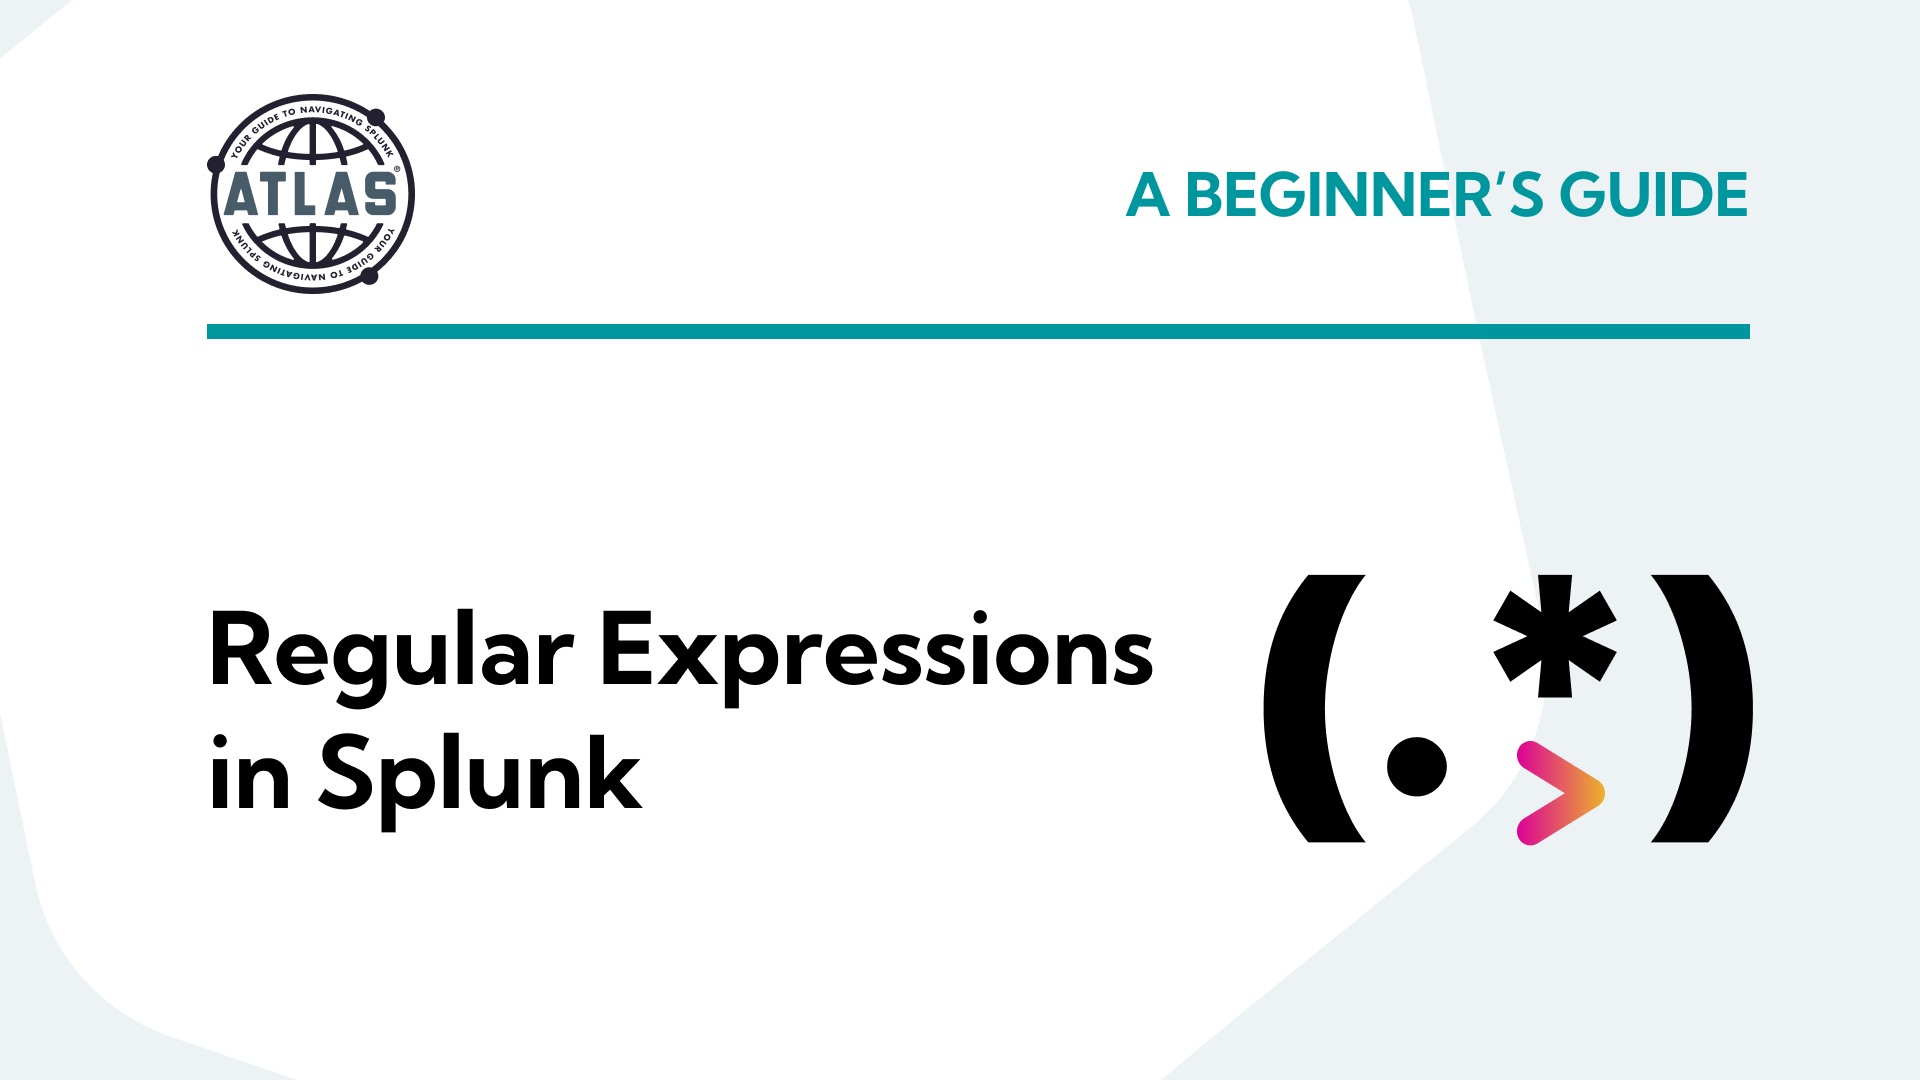 A beginners guide to regular expressions in splunk